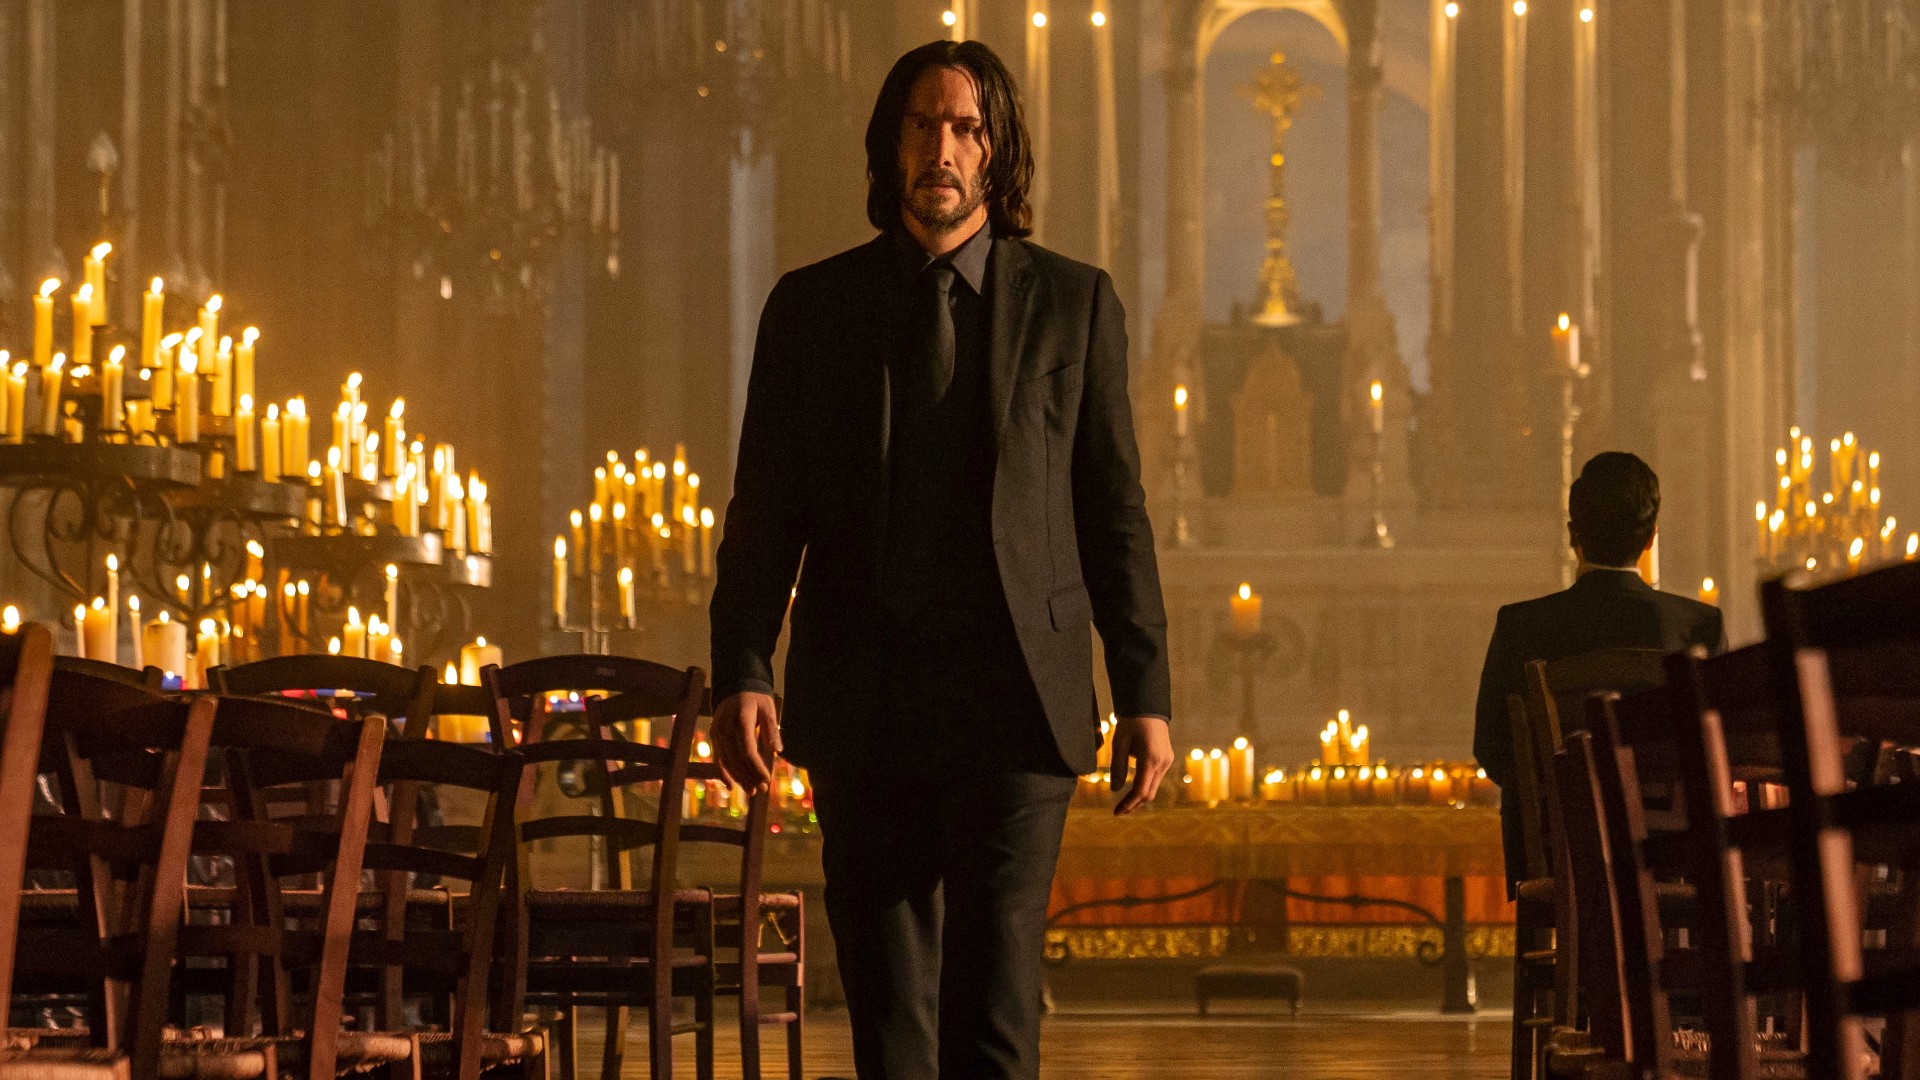 Where to Watch 'John Wick' Movies: Stream the First 3 Films on Peacock